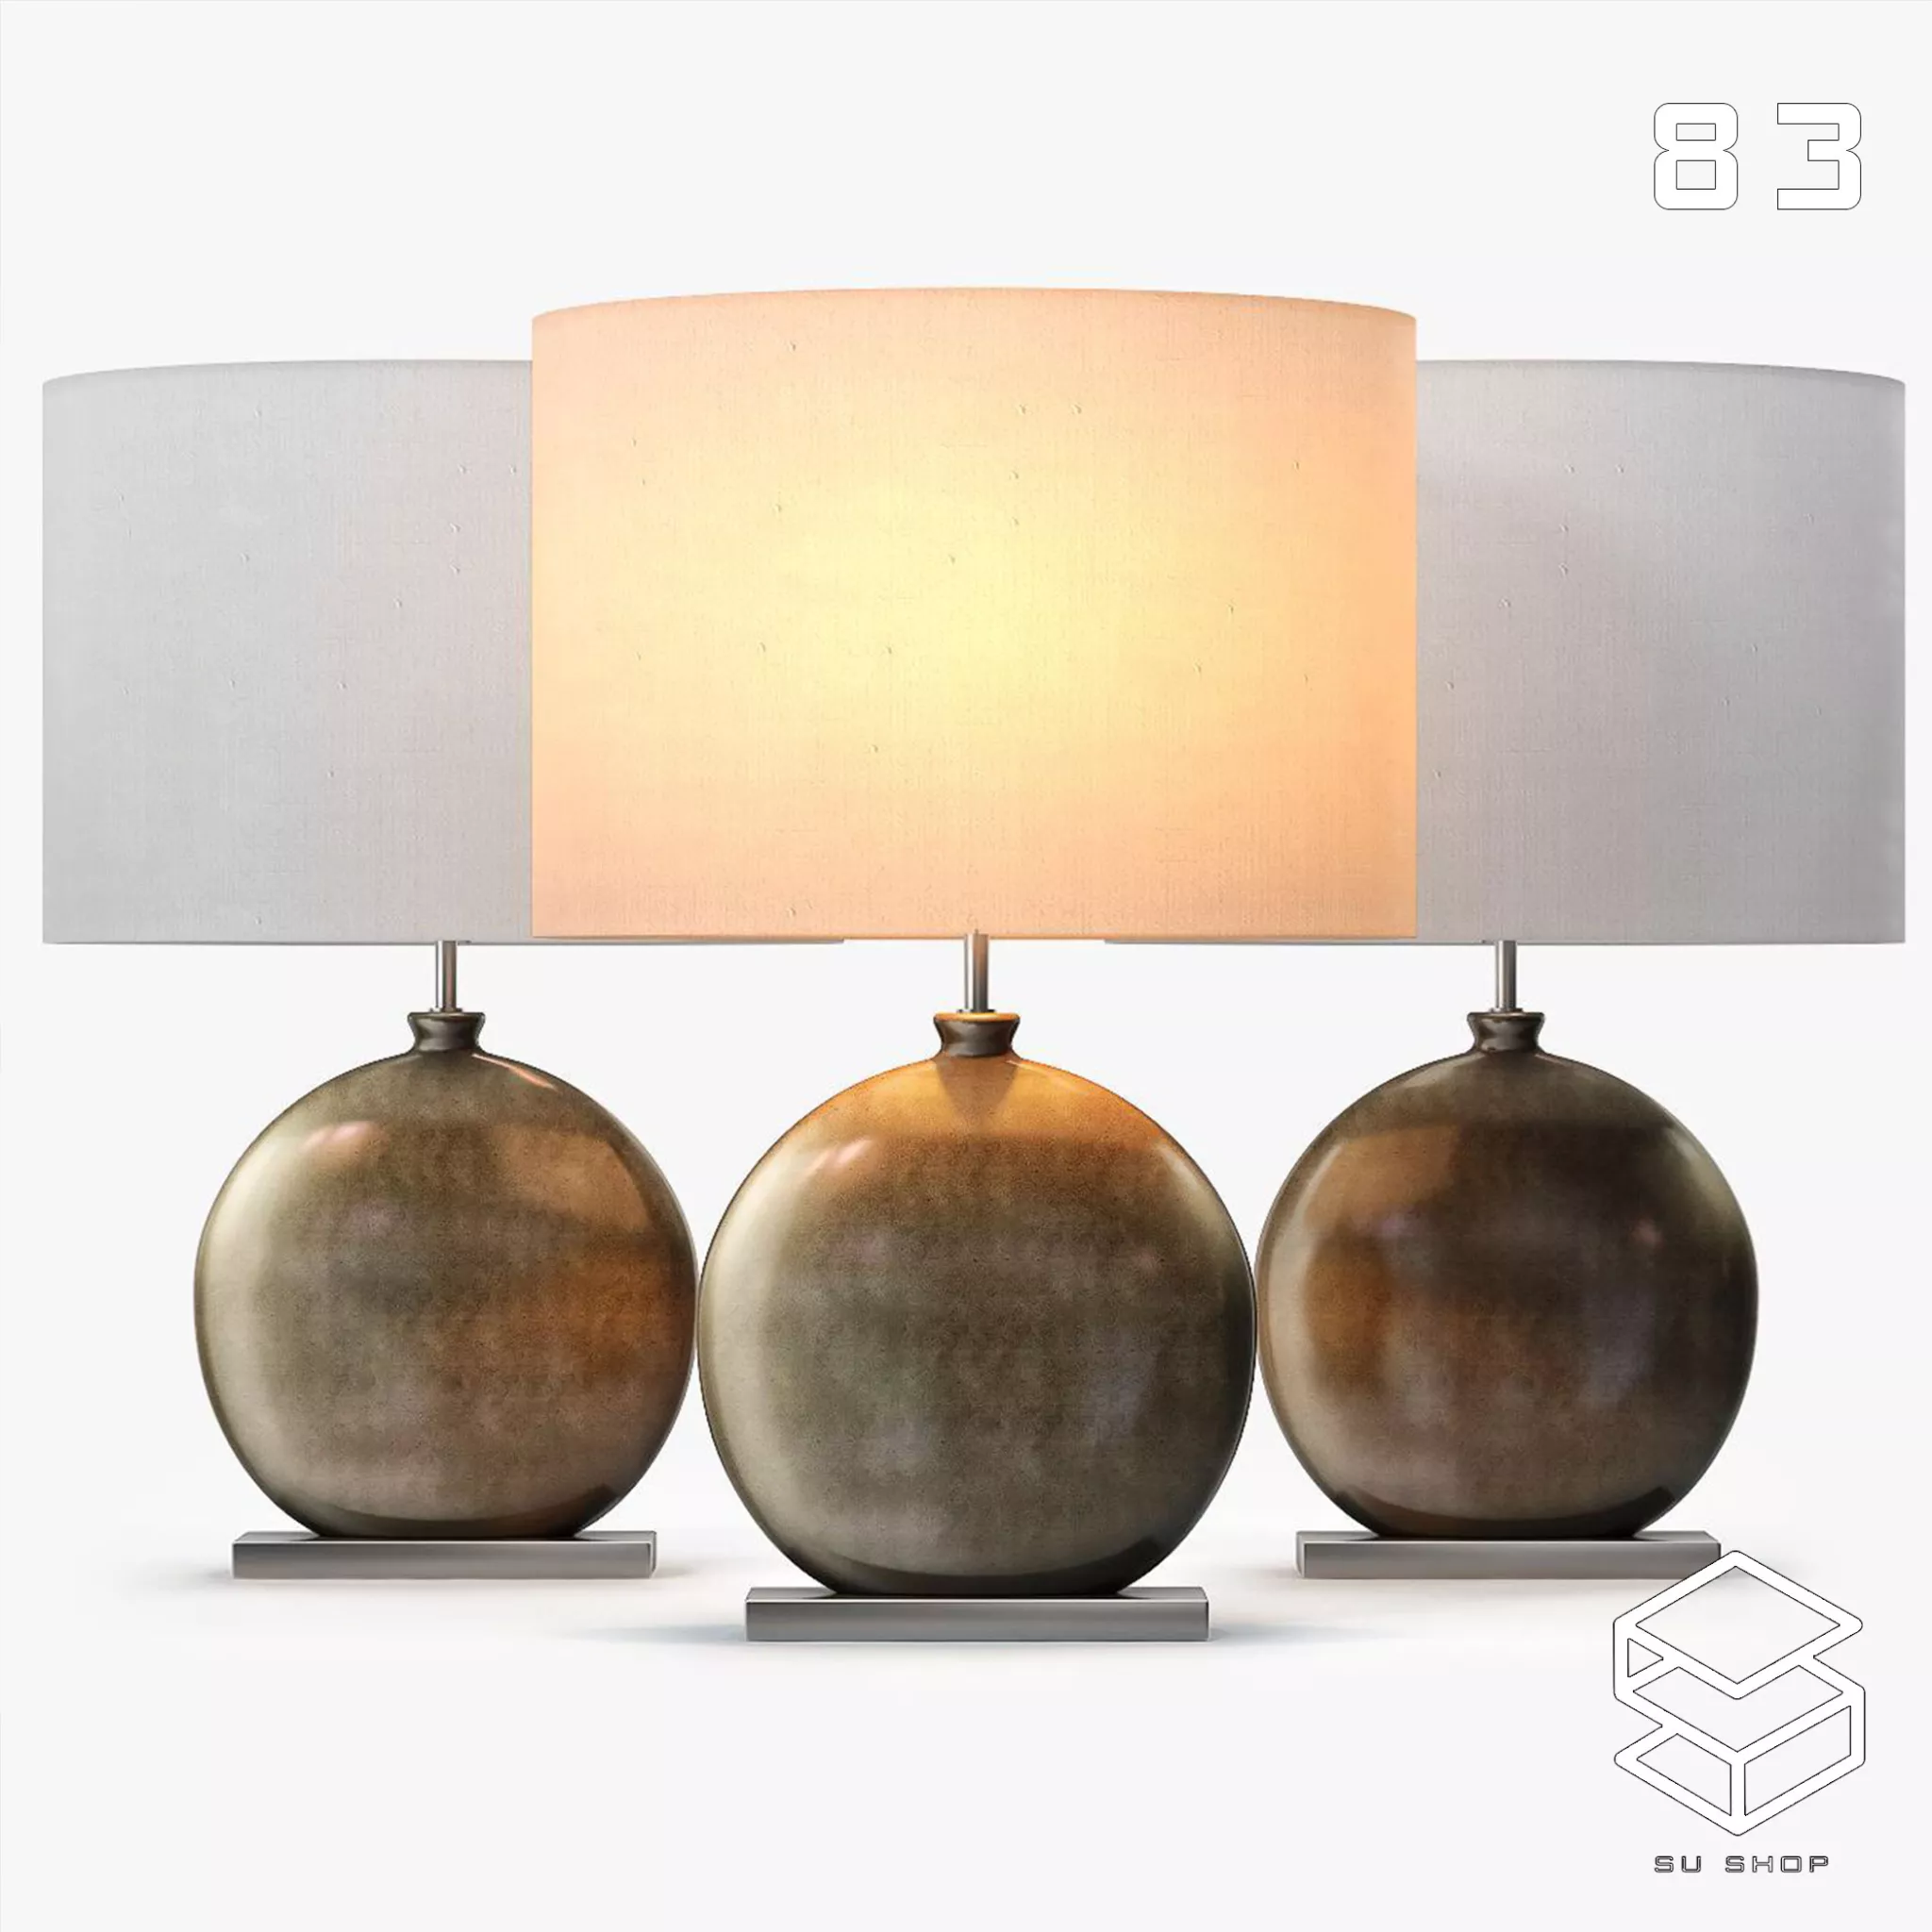 MODERN TABLE LAMP - SKETCHUP 3D MODEL - VRAY OR ENSCAPE - ID14881